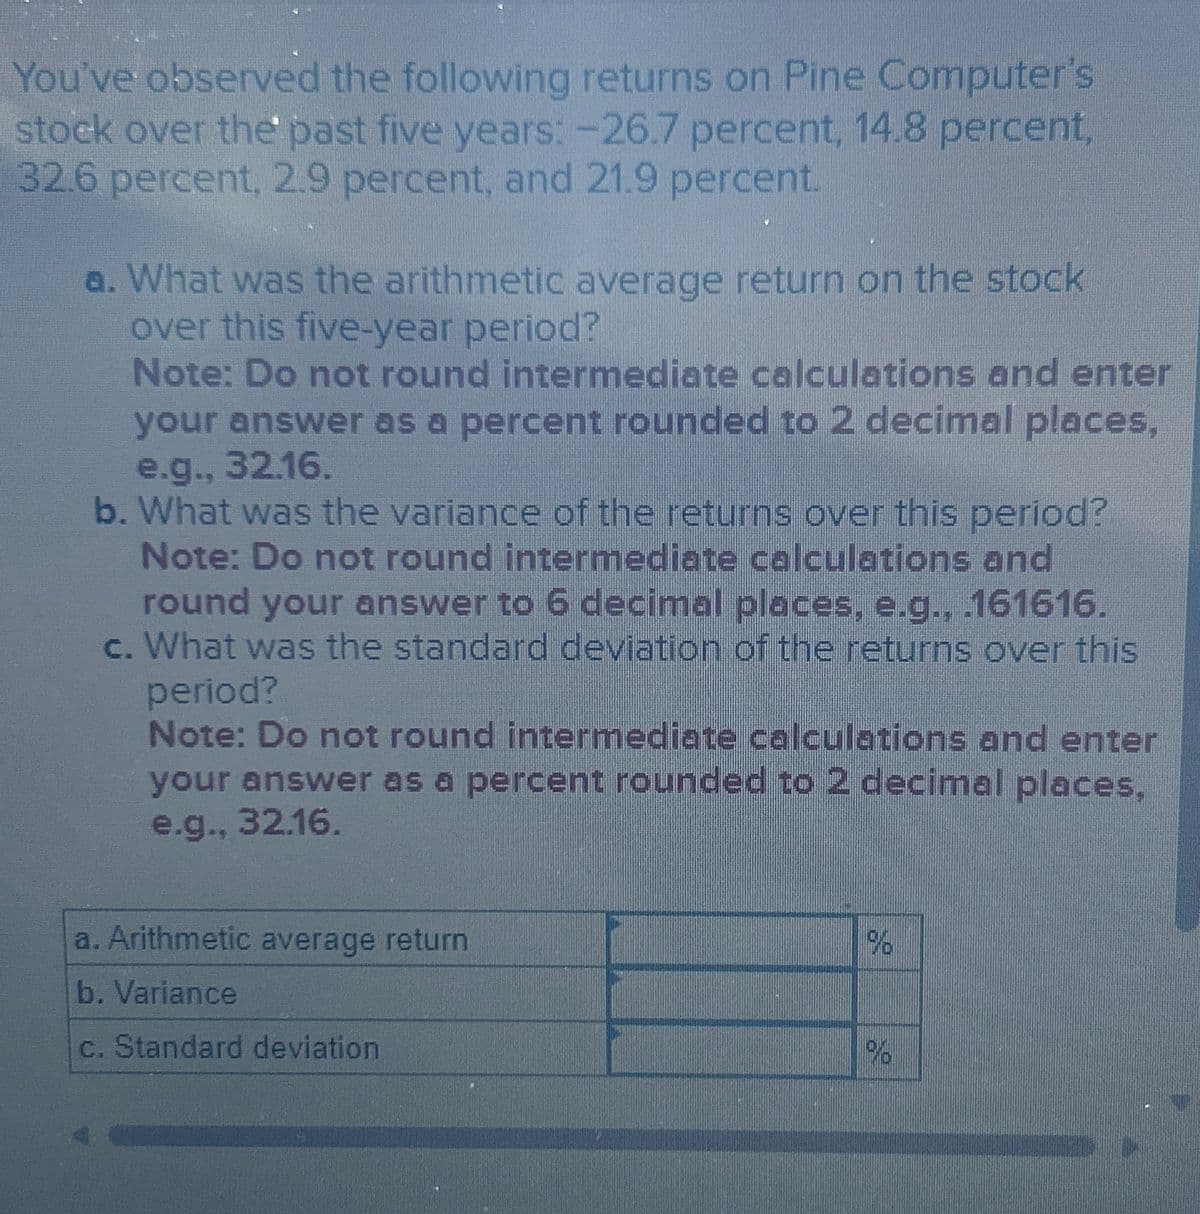 You've observed the following returns on Pine Computer's
stock over the past five years: -26.7 percent, 14.8 percent,
32.6 percent, 2.9 percent, and 21.9 percent.
a. What was the arithmetic average return on the stock
over this five-year period?
Note: Do not round intermediate calculations and enter
your answer as a percent rounded to 2 decimal places,
e.g., 32.16.
b. What was the variance of the returns over this period?
Note: Do not round intermediate calculations and
round your answer to 6 decimal places, e.g., .161616.
c. What was the standard deviation of the returns over this
period?
Note: Do not round intermediate calculations and enter
your answer as a percent rounded to 2 decimal places,
e.g., 32.16.
Arithmetic average return
b. Variance
c. Standard deviation
96
%